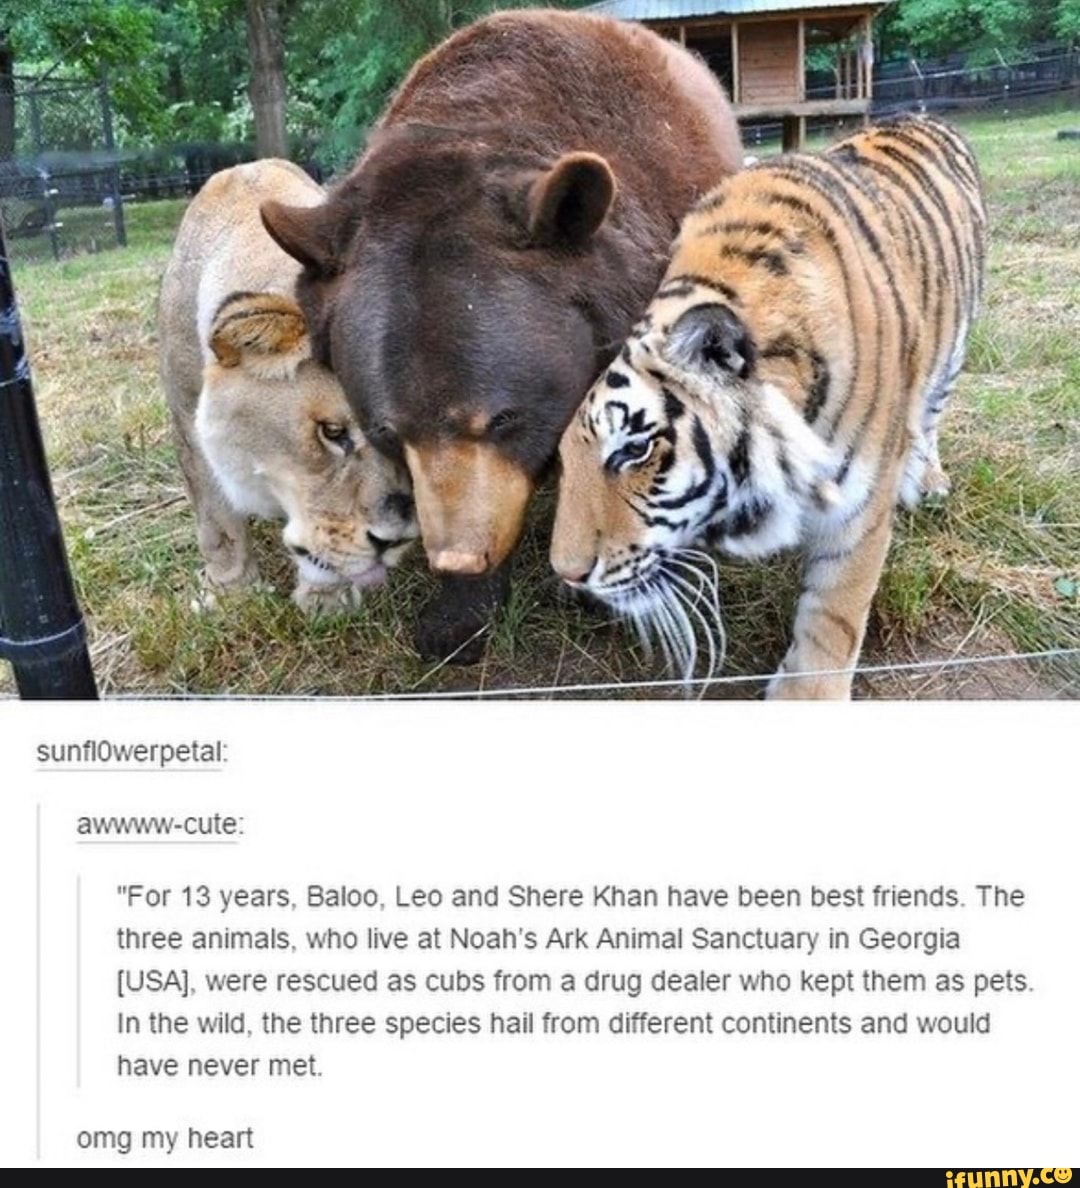 "For 13 years, Baloo, Leo and Shere Khan have been best friends